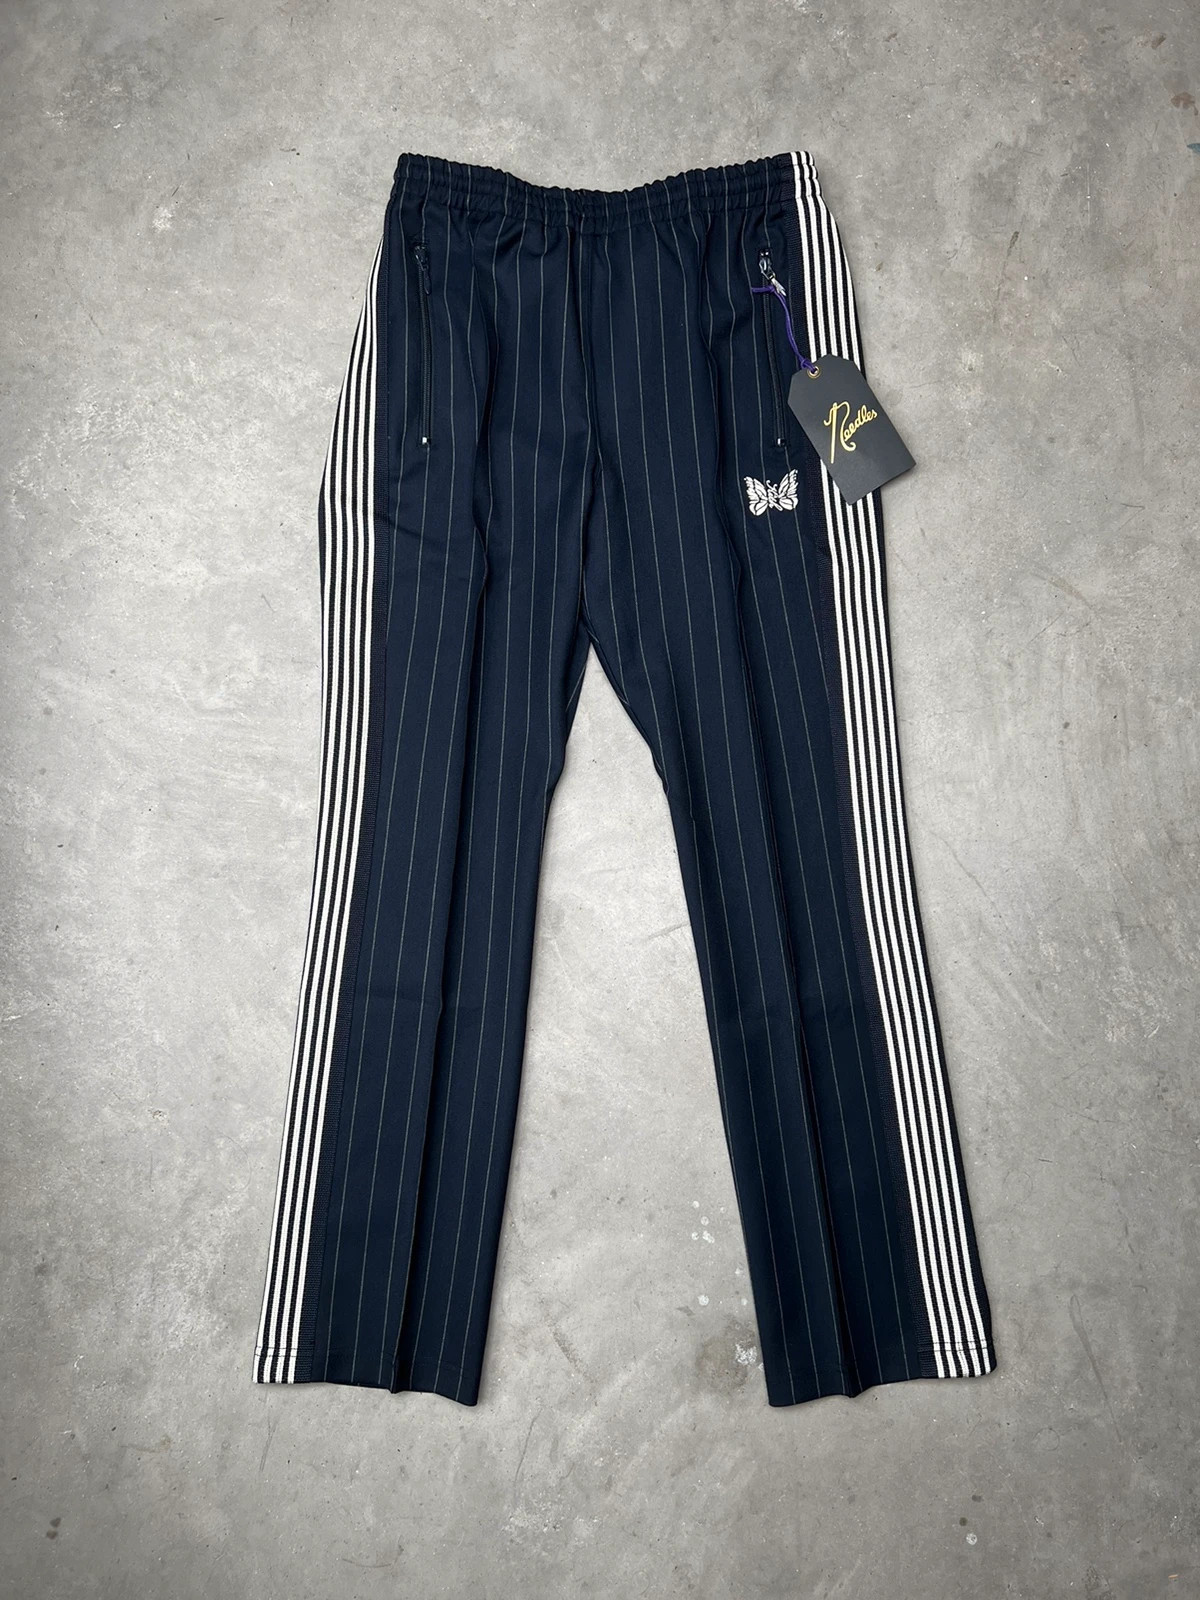 Kith for Needles Double Knit Navy Striped Track Pant | Vinted